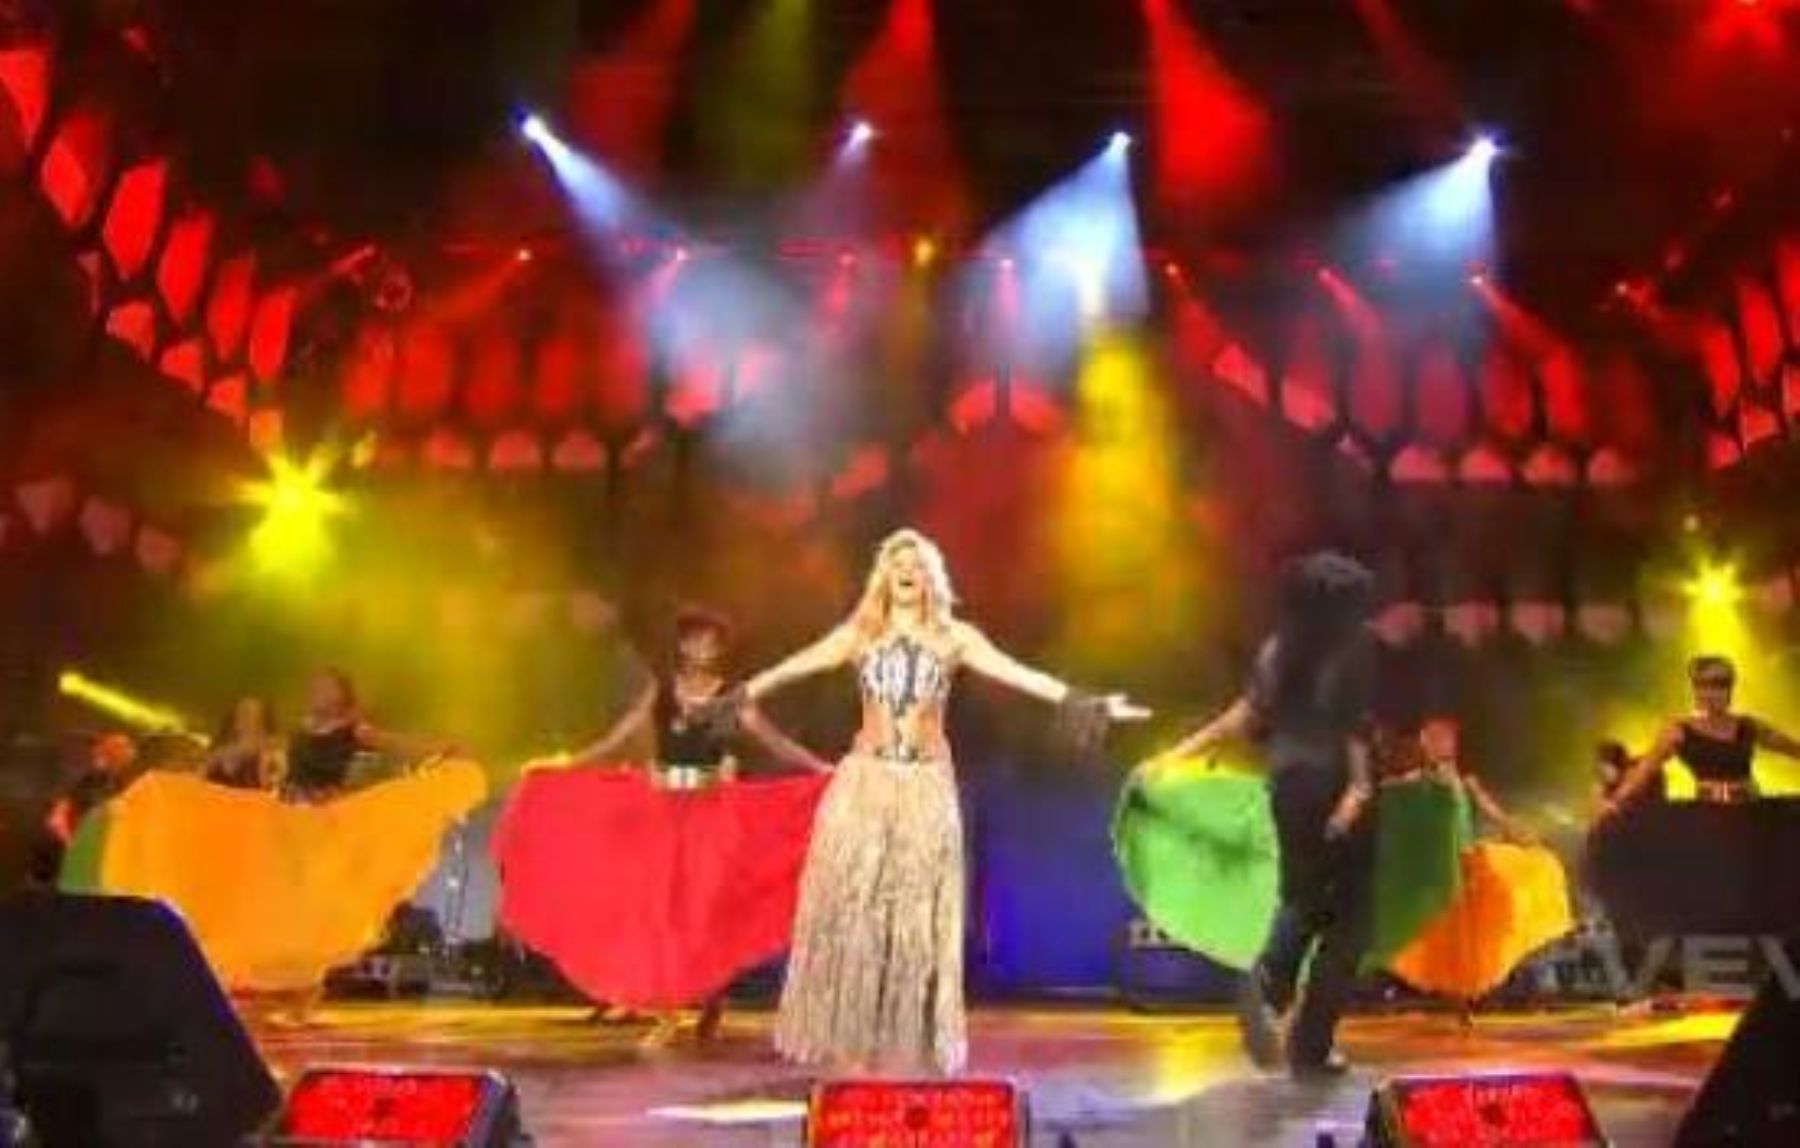 Shakira performed in the concert prior to South Africa World Cup launch